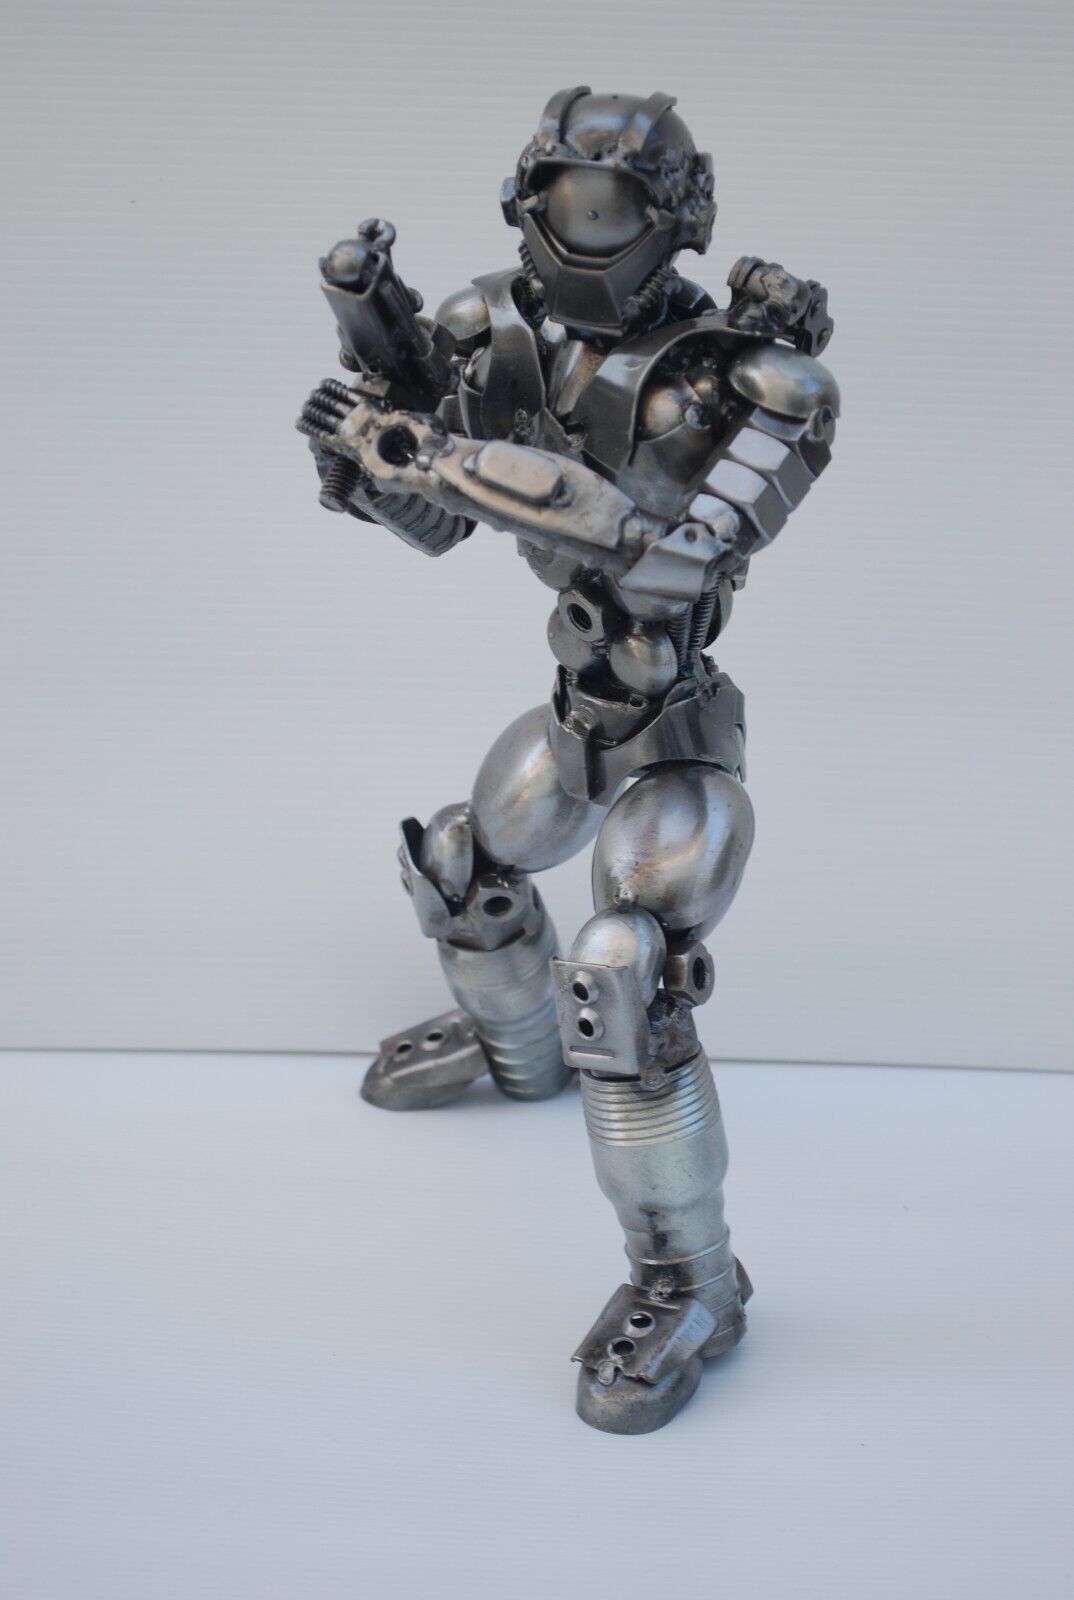 Halo Master Chief Recycled metal sculpture, Cool gift for dad, wow gift for him